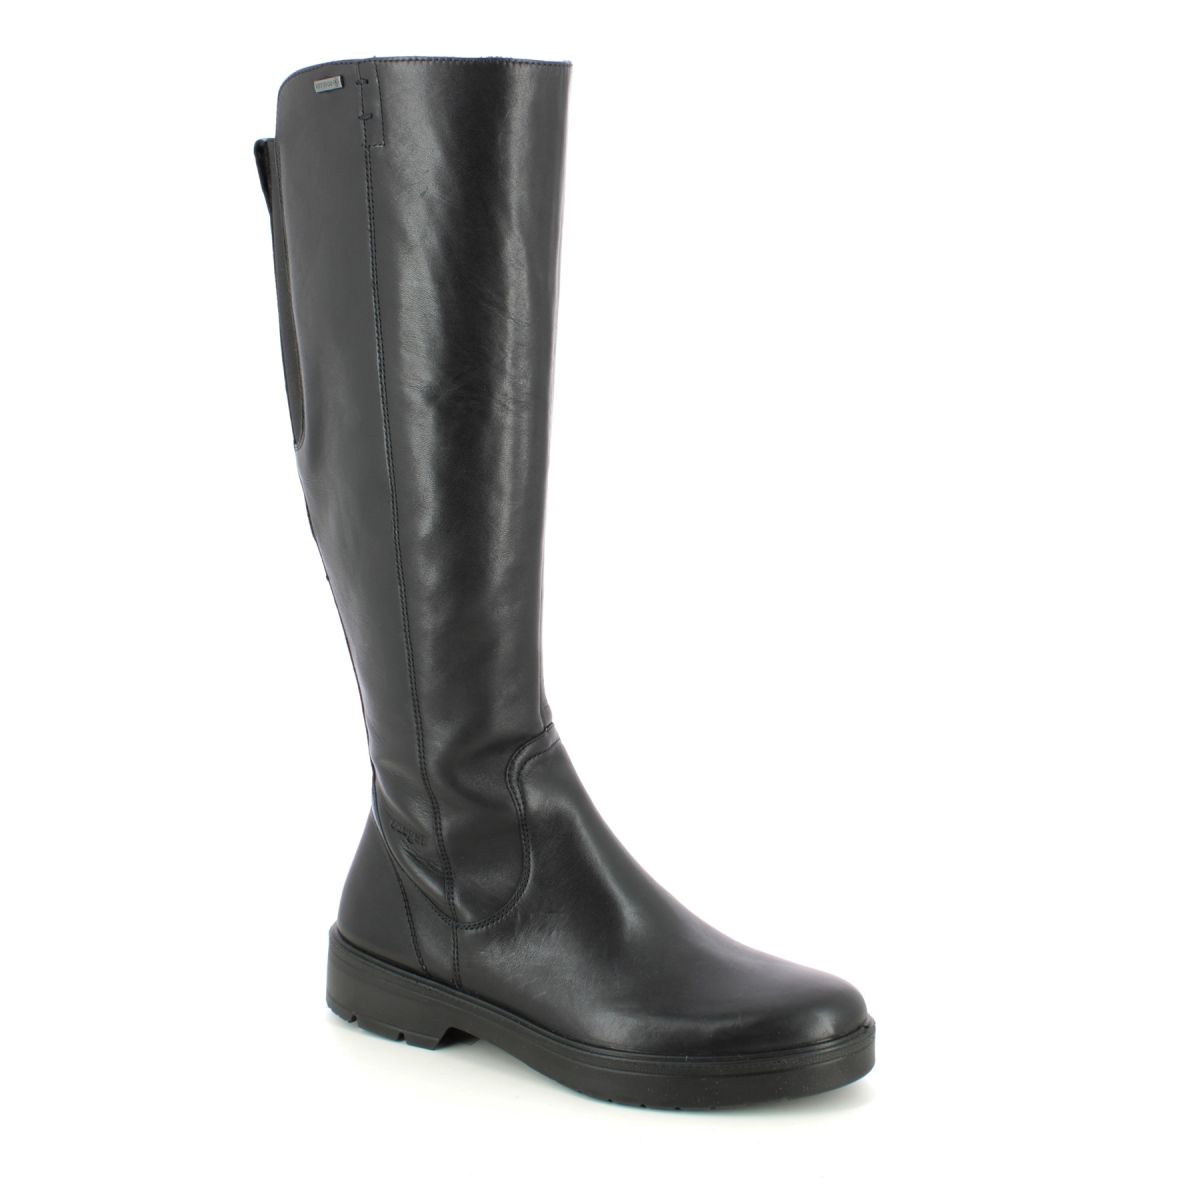 Legero Mystic Long Gtx Black Leather Womens Knee-High Boots 2000195-0100 In Size 6.5 In Plain Black Leather